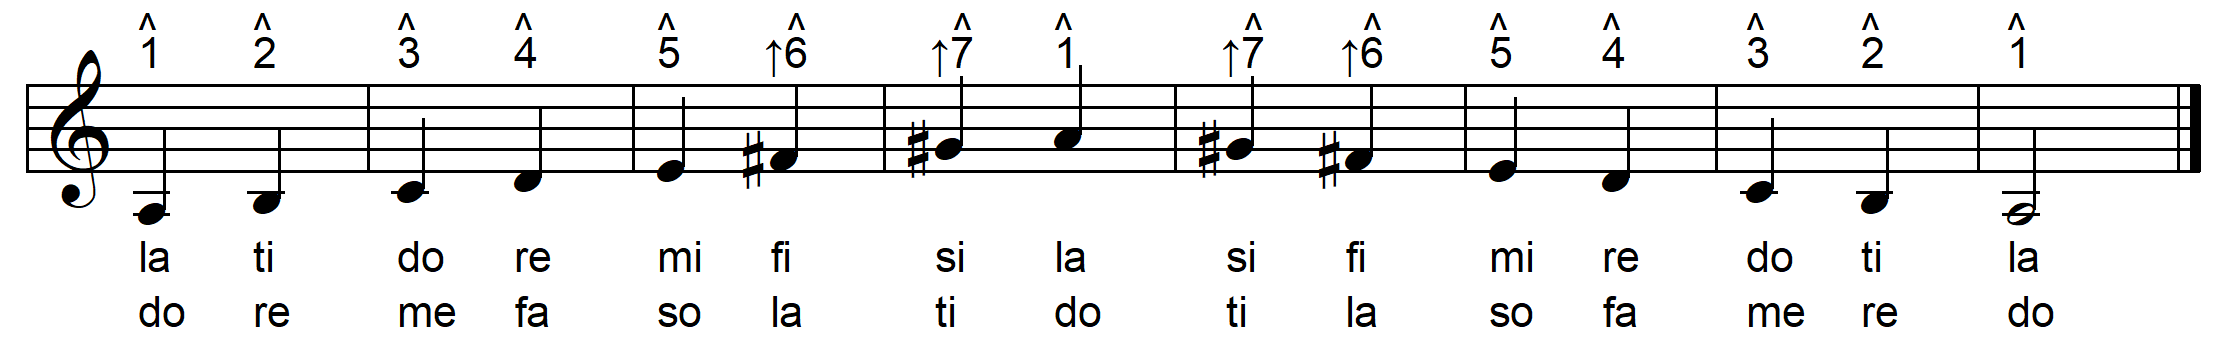 jazz minor scale with solfege and scale degree numbers